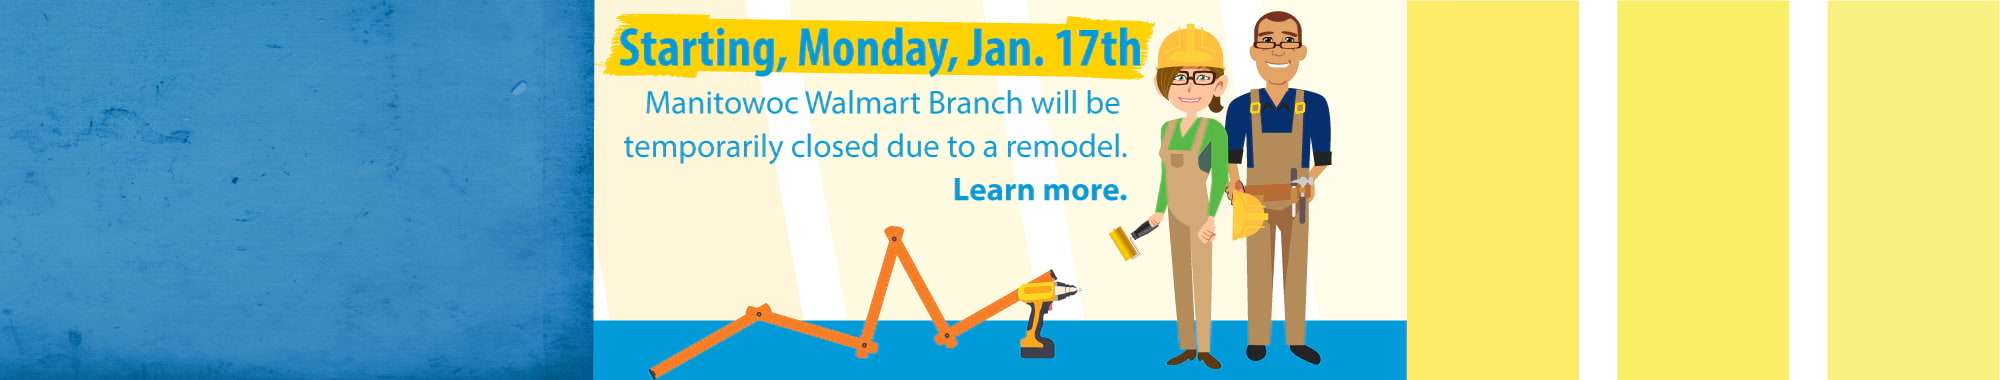 Starting, Monday, January 17th - UnitedOne Walmart SuperCenter Branch will be temporarily closed due to a remodel. Learn more!